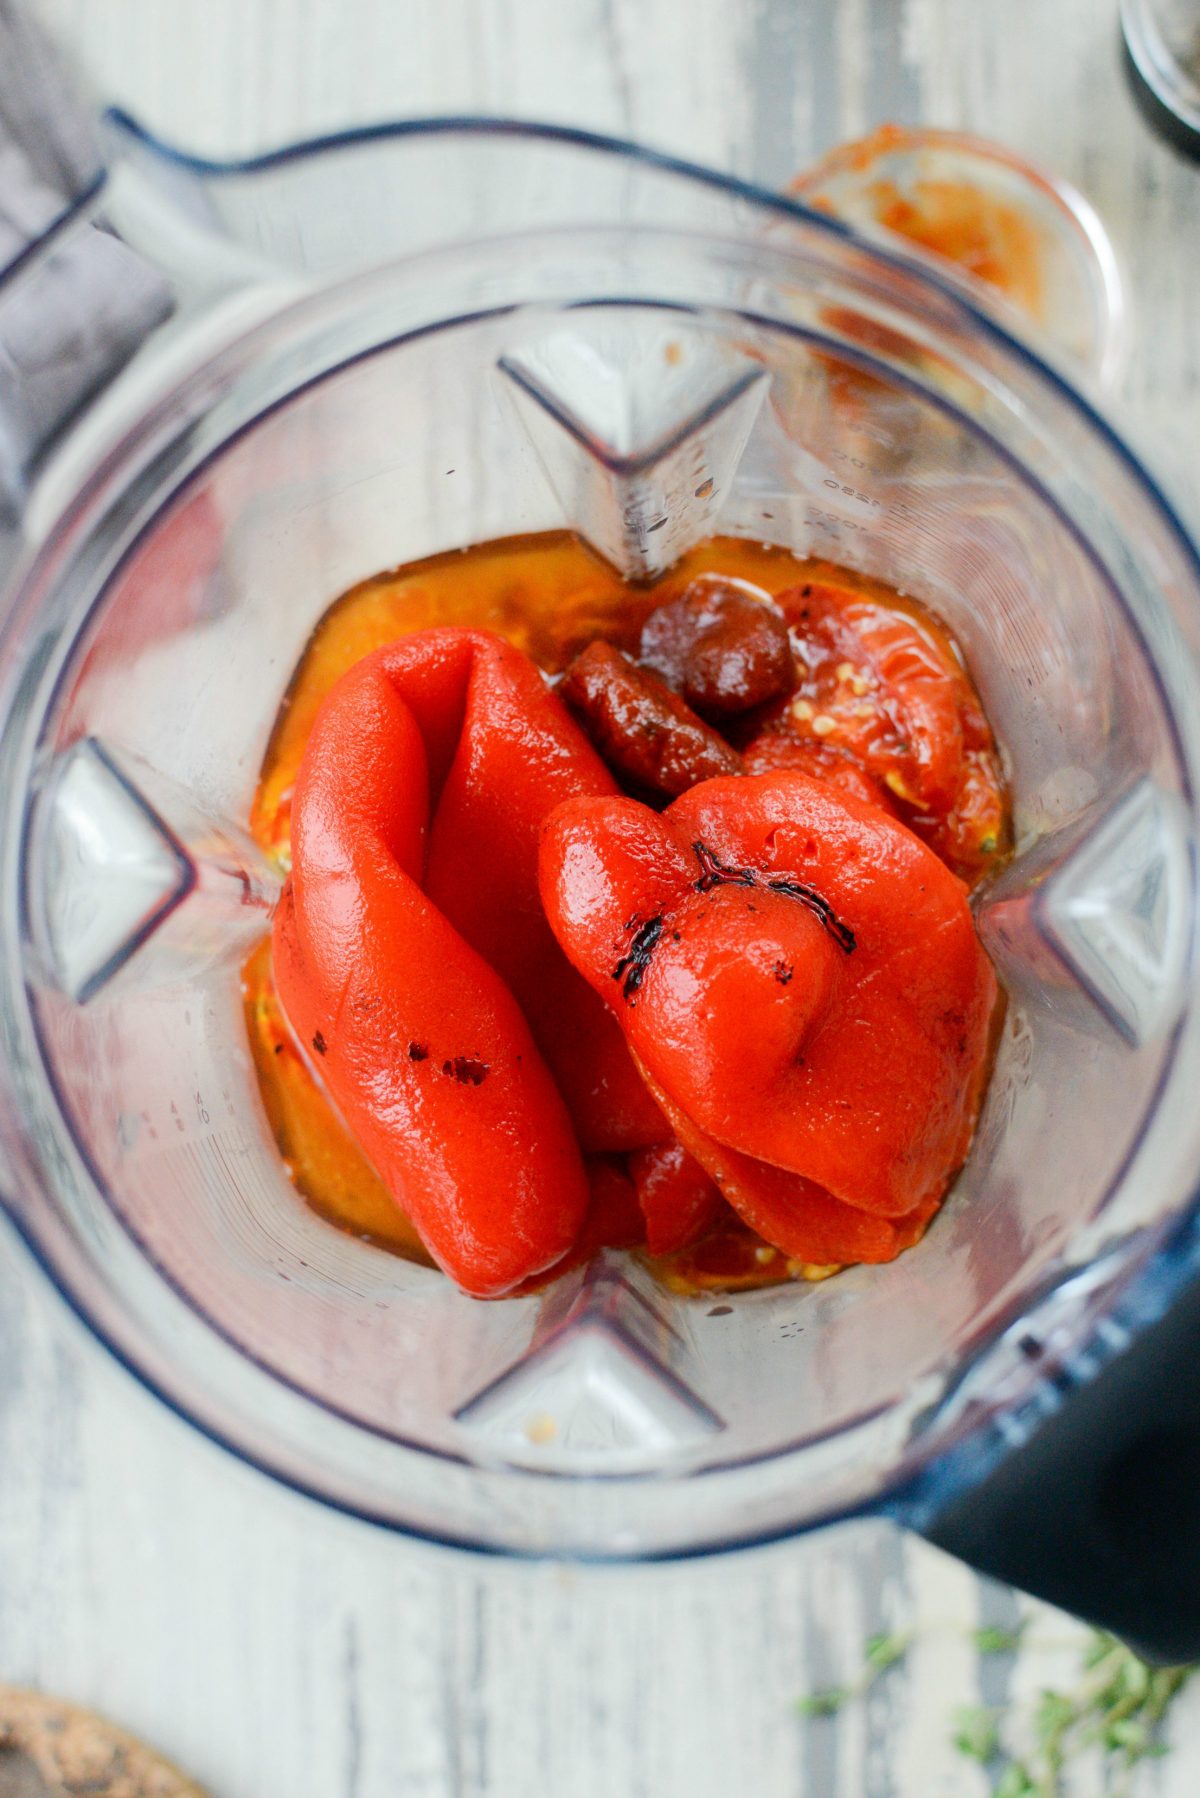 add roasted tomatoes and peppers to a blender